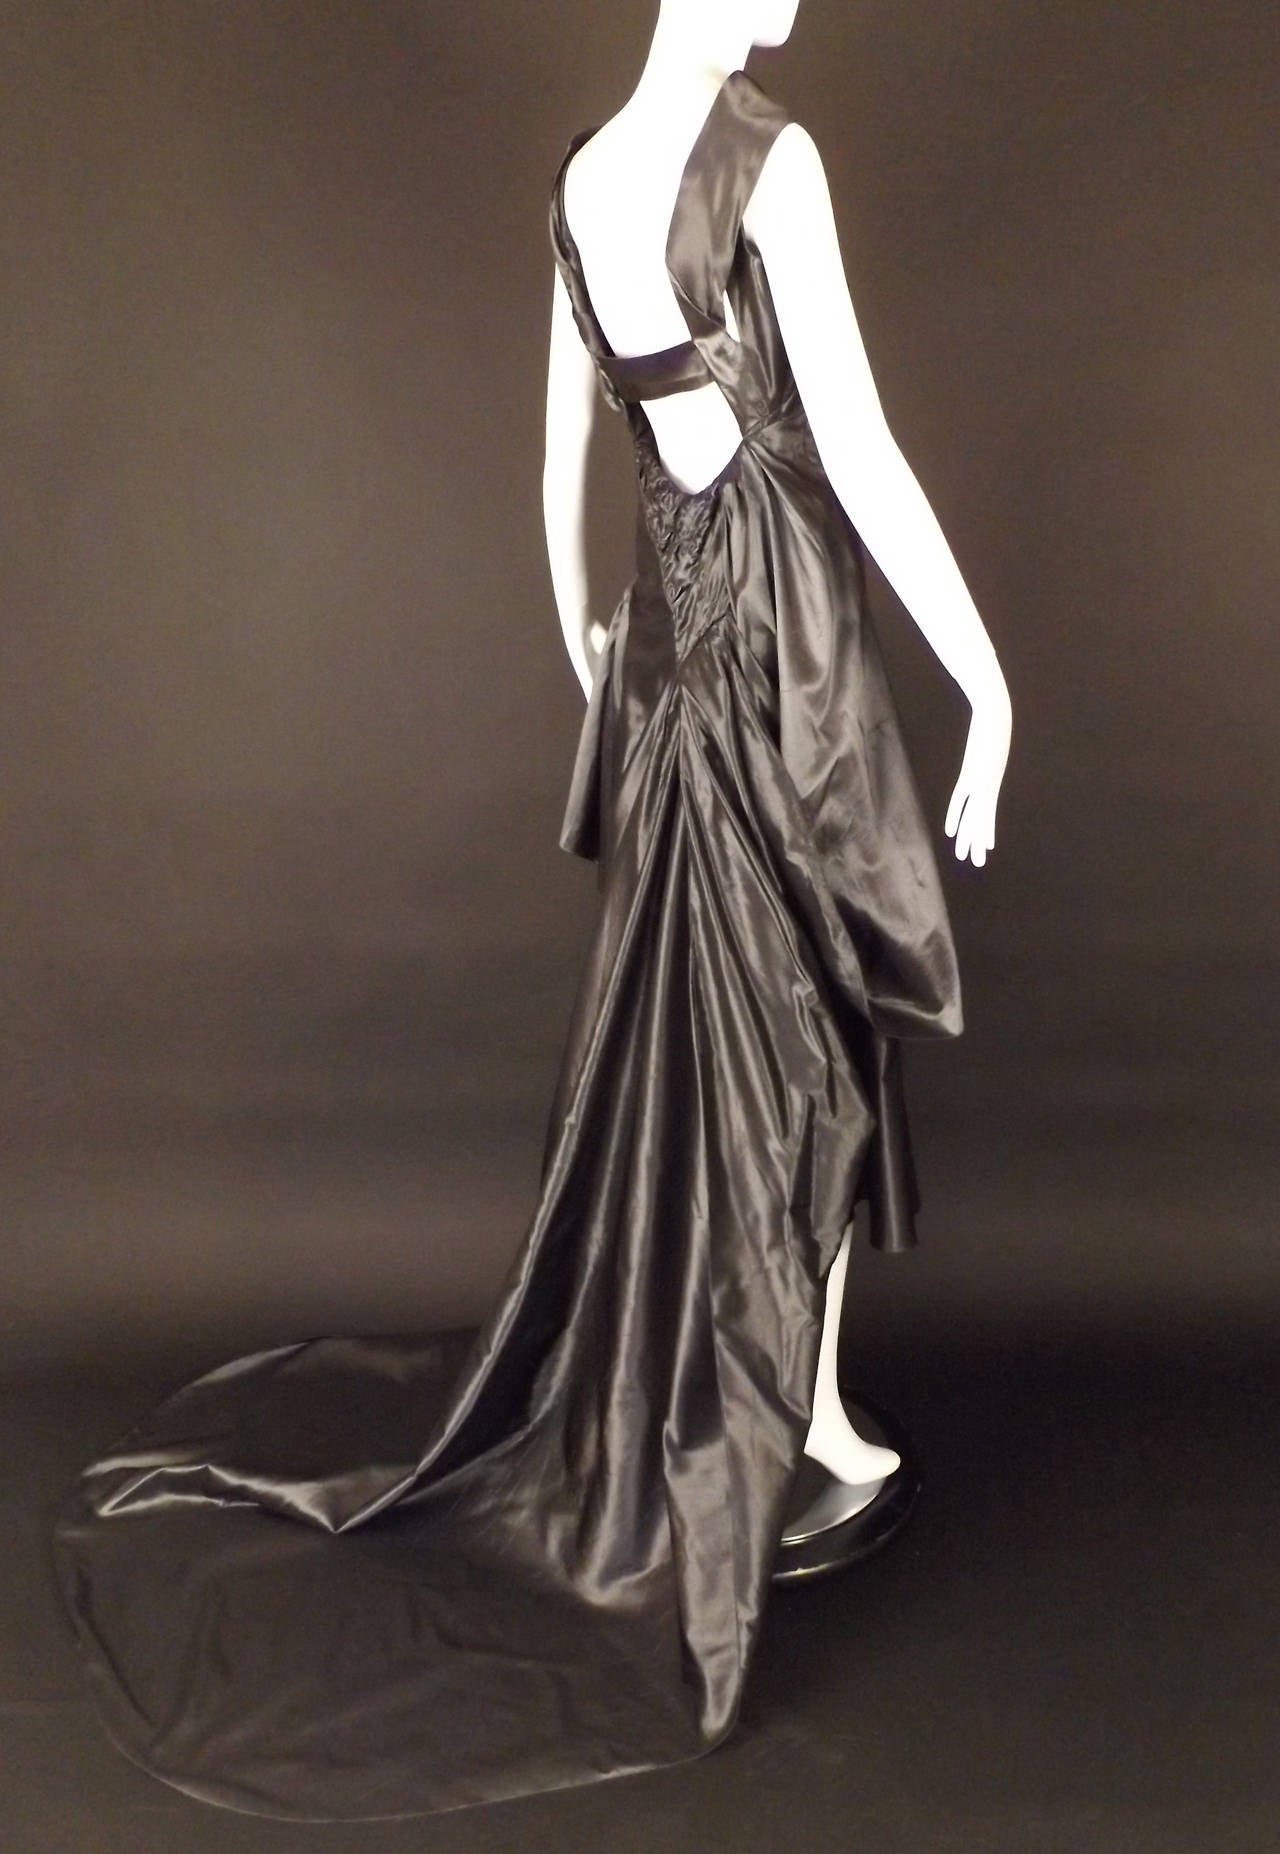 Fantastic evening gown in a pewter silk taffeta. The gown has a draped, bias neckline with a single shoulder strap on the right side. The dress is dart fitted at the bust and has button and loop closures down the right side seam.  The dress has very